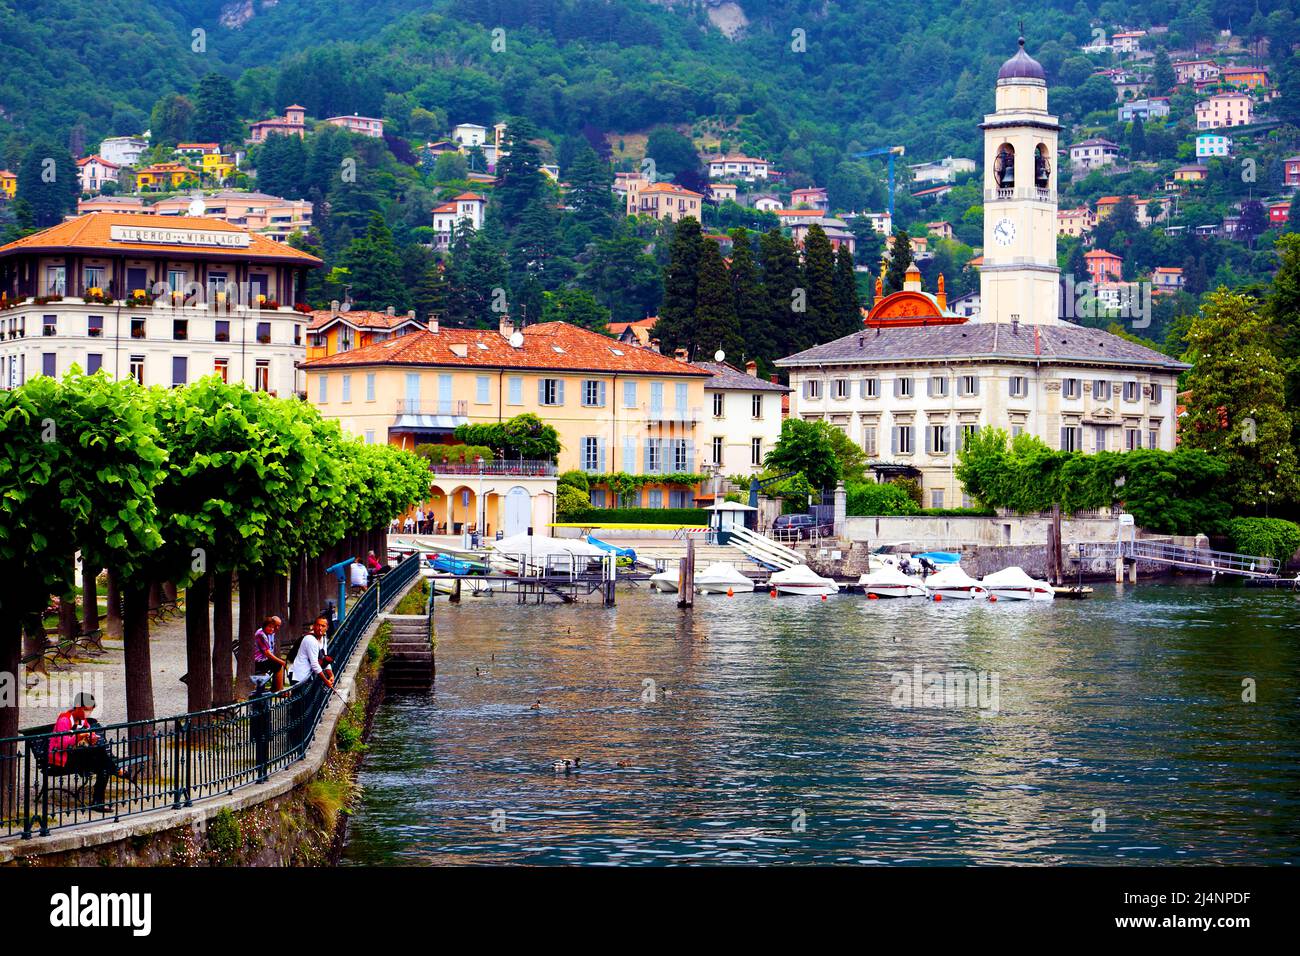 The village of Cernobbio on the shores of Lake Como in northern Italy Stock Photo